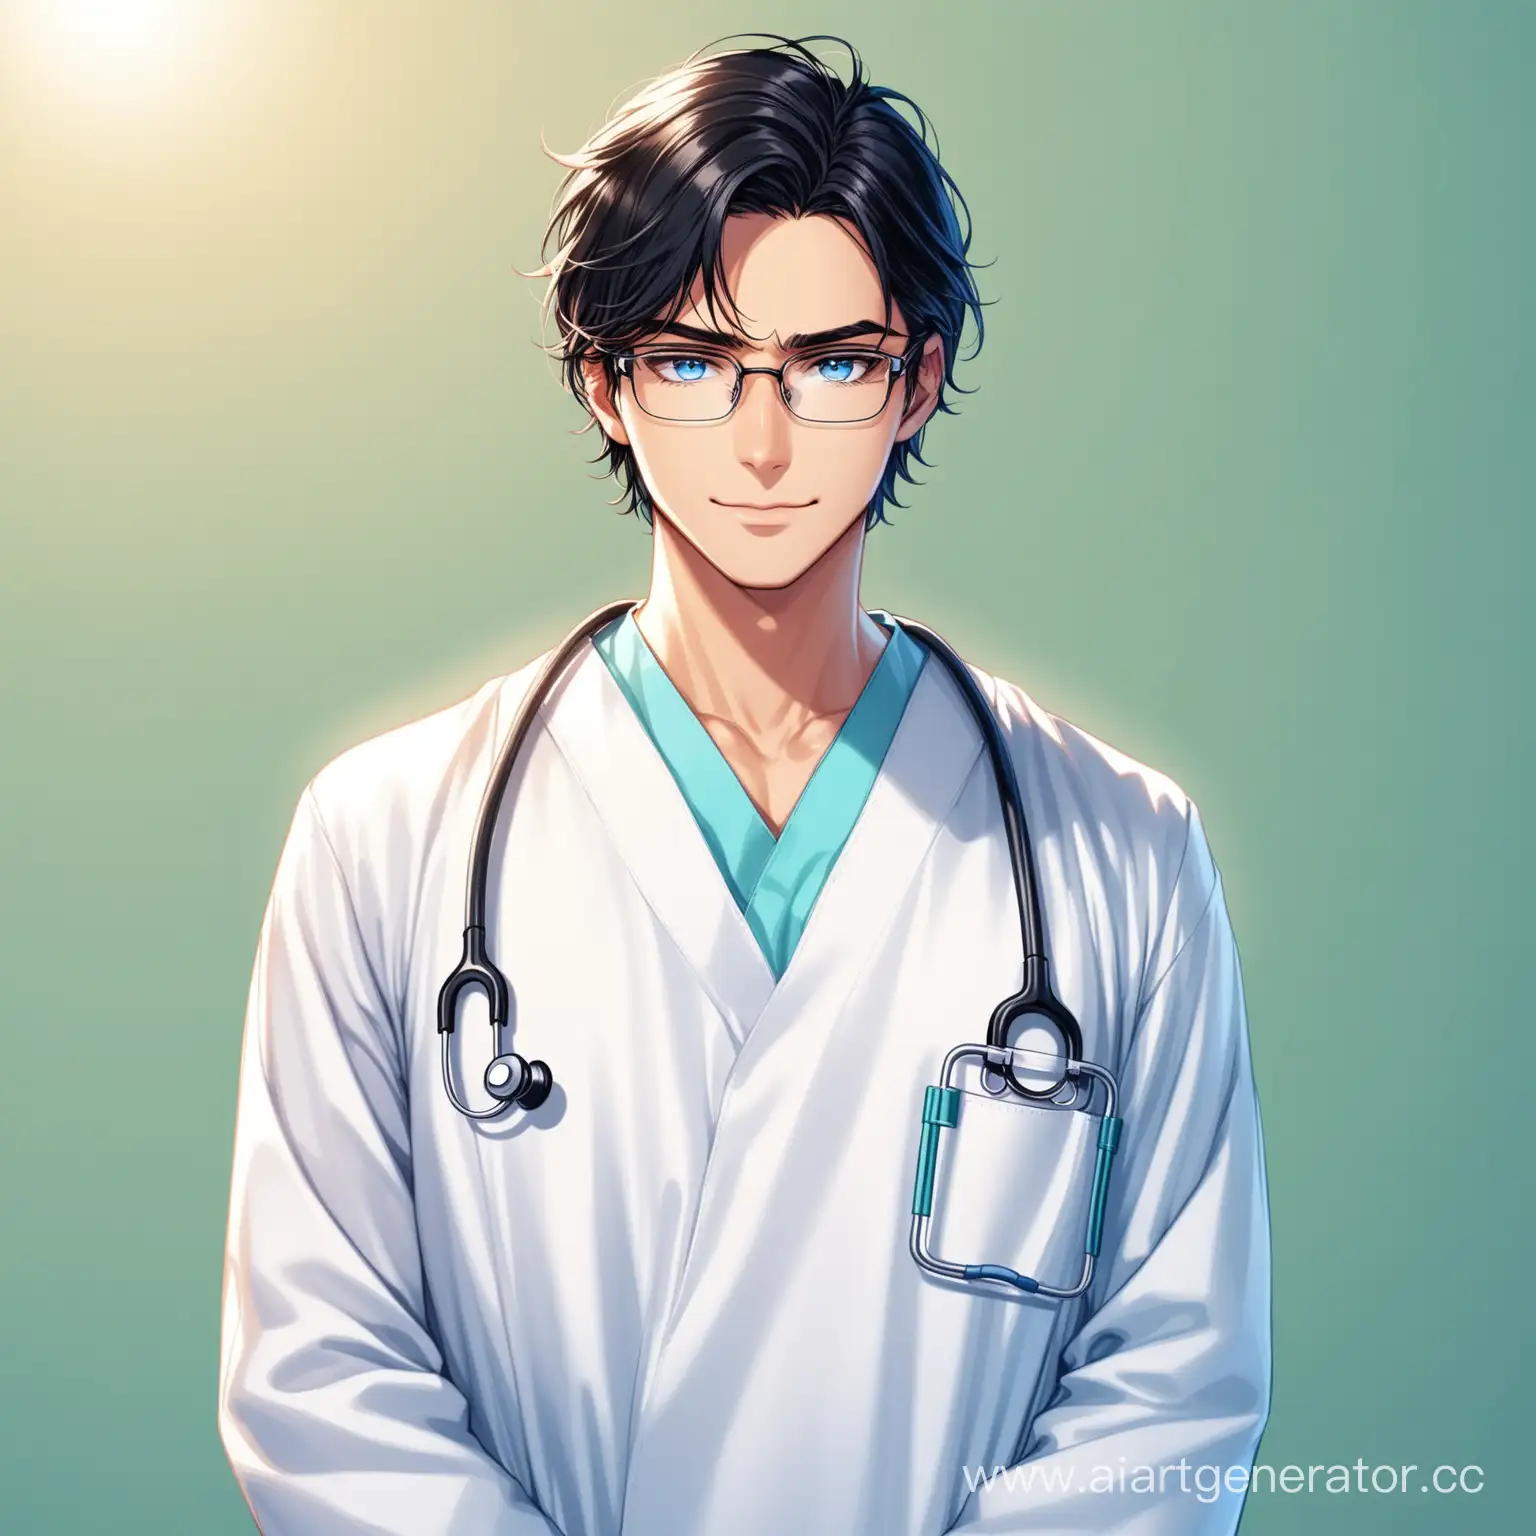 A nice guy, dressed in a medical gown and glasses, black hair and blue eyes